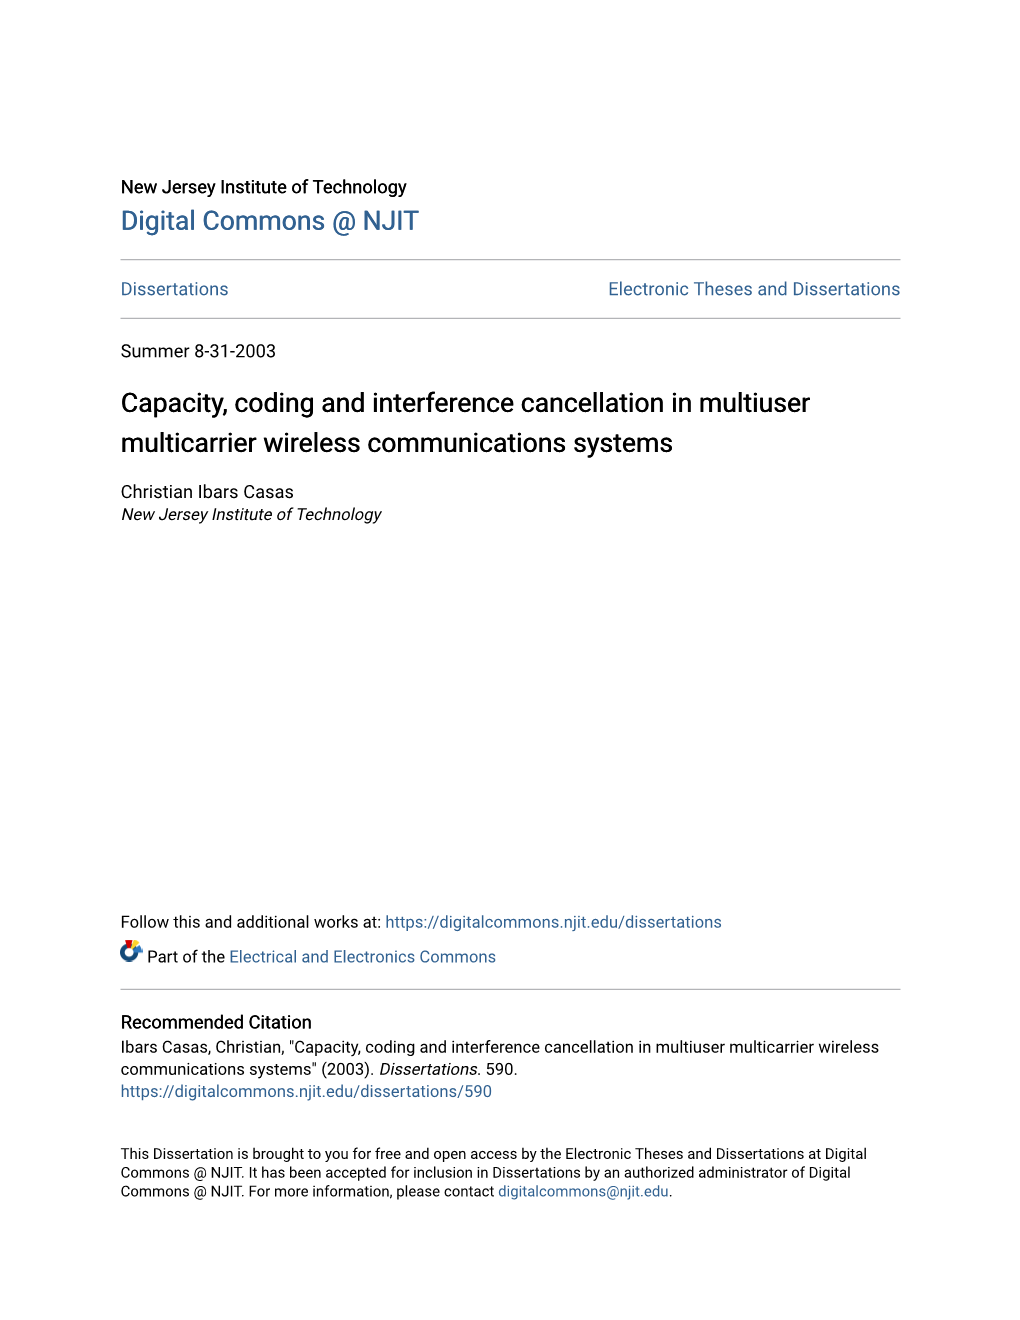 Capacity, Coding and Interference Cancellation in Multiuser Multicarrier Wireless Communications Systems